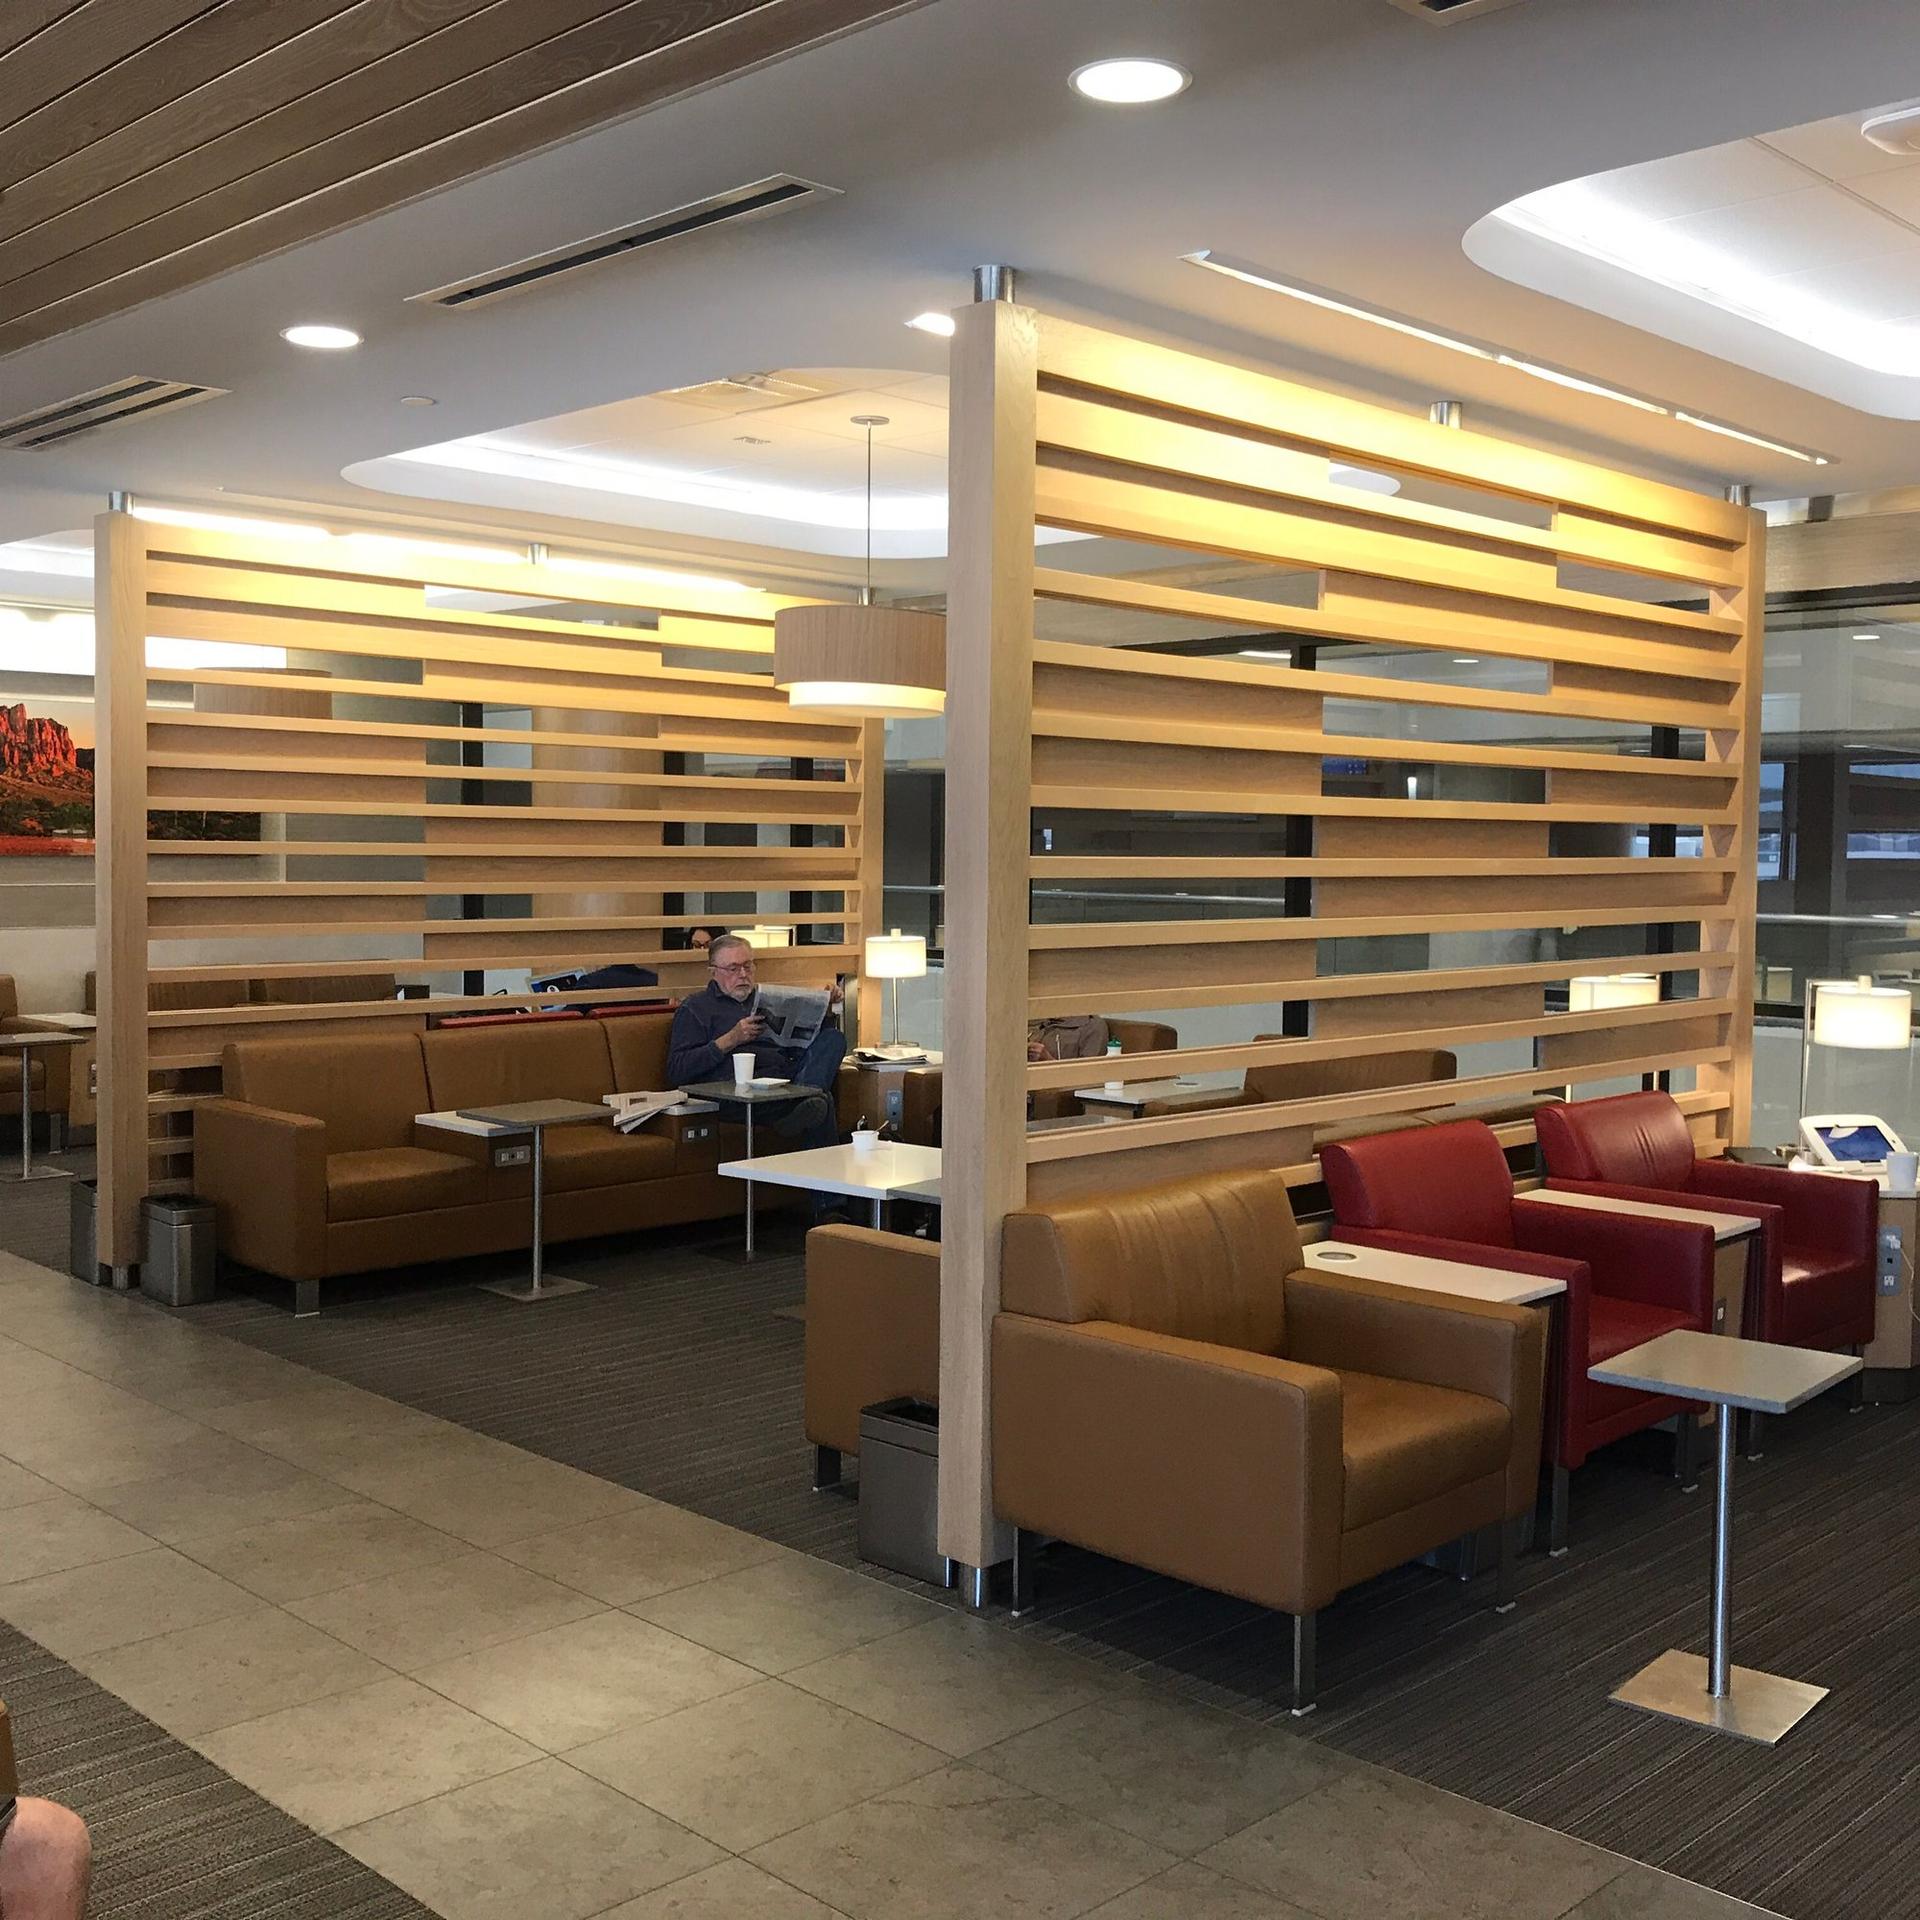 American Airlines Admirals Club (Gate A7) image 18 of 25